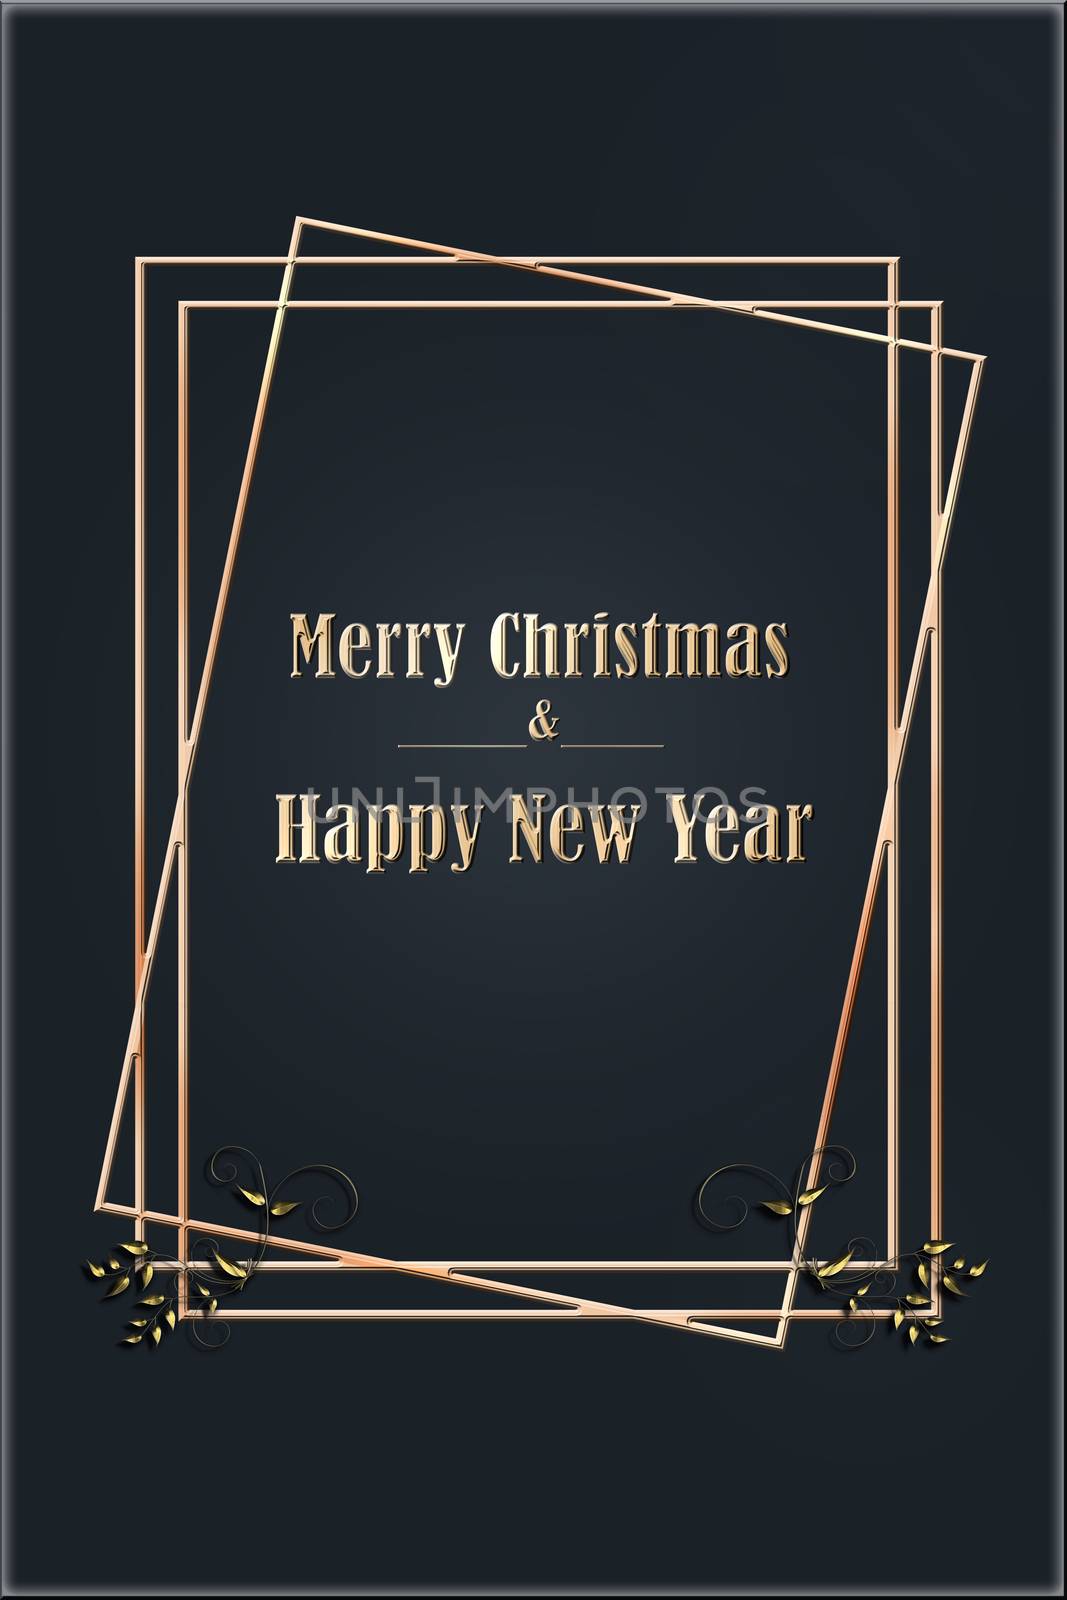 Christmas card in gold and black colors. by NelliPolk